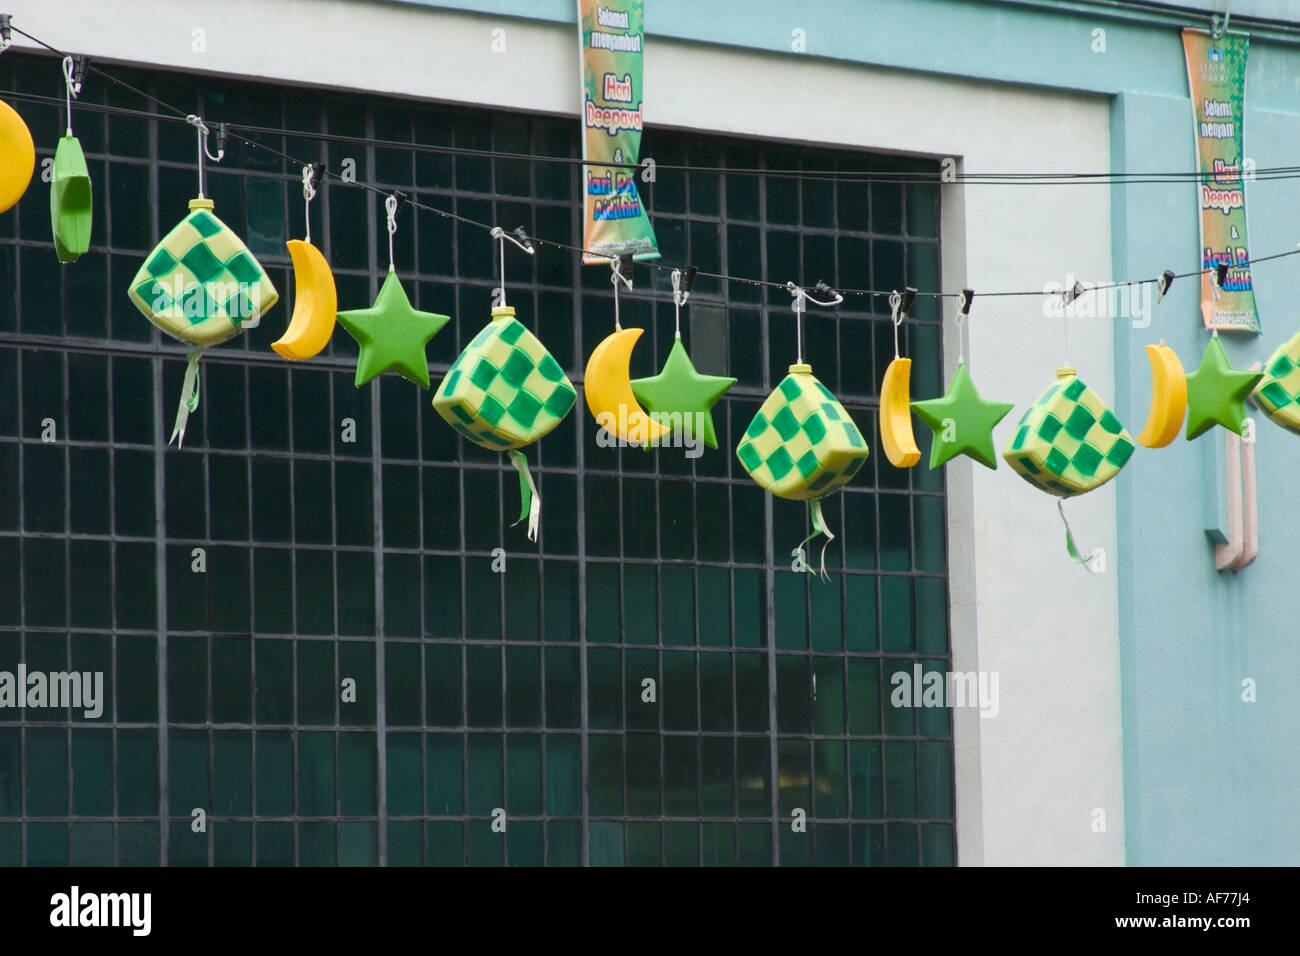 decorations hanging in mid air to celebrate hari raya festival or ...